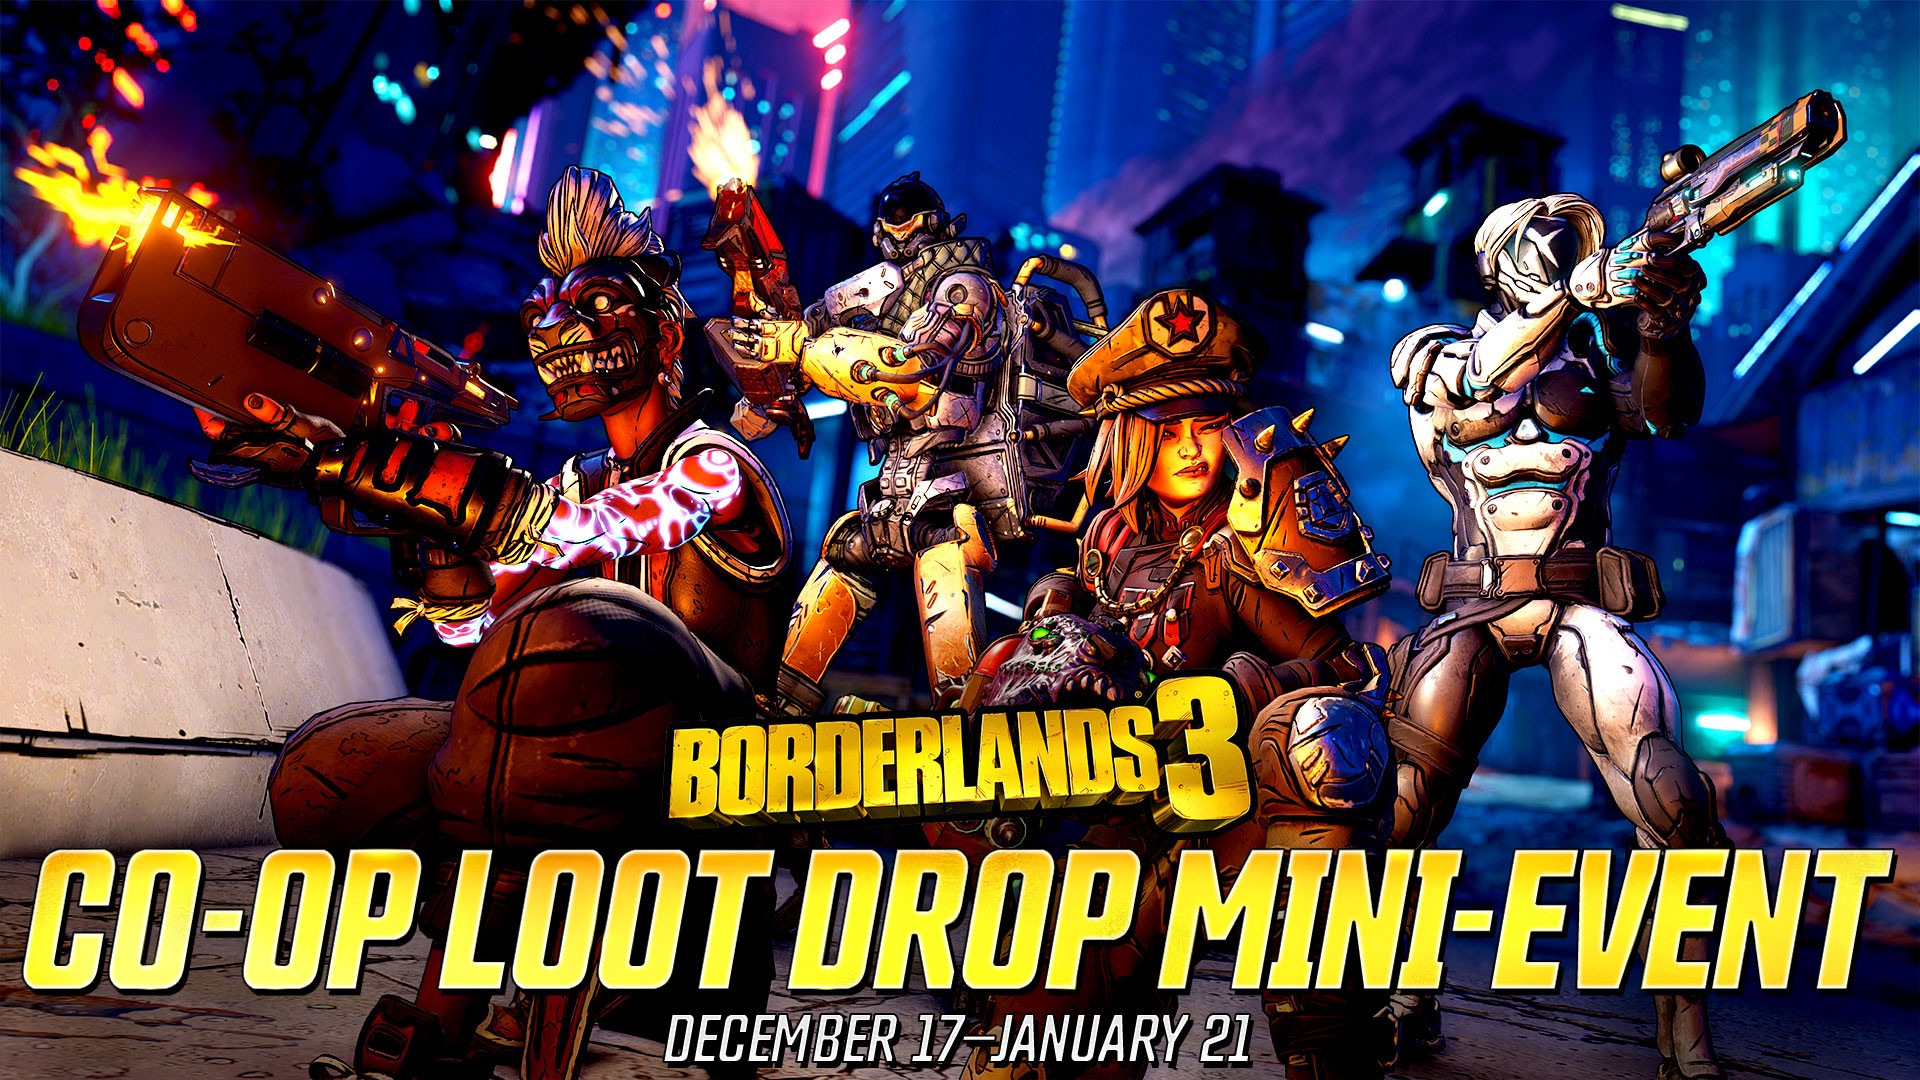 Team Up To Earn Additional Loot In Borderlands 3’s Co-op Loot Drop Mini-Event